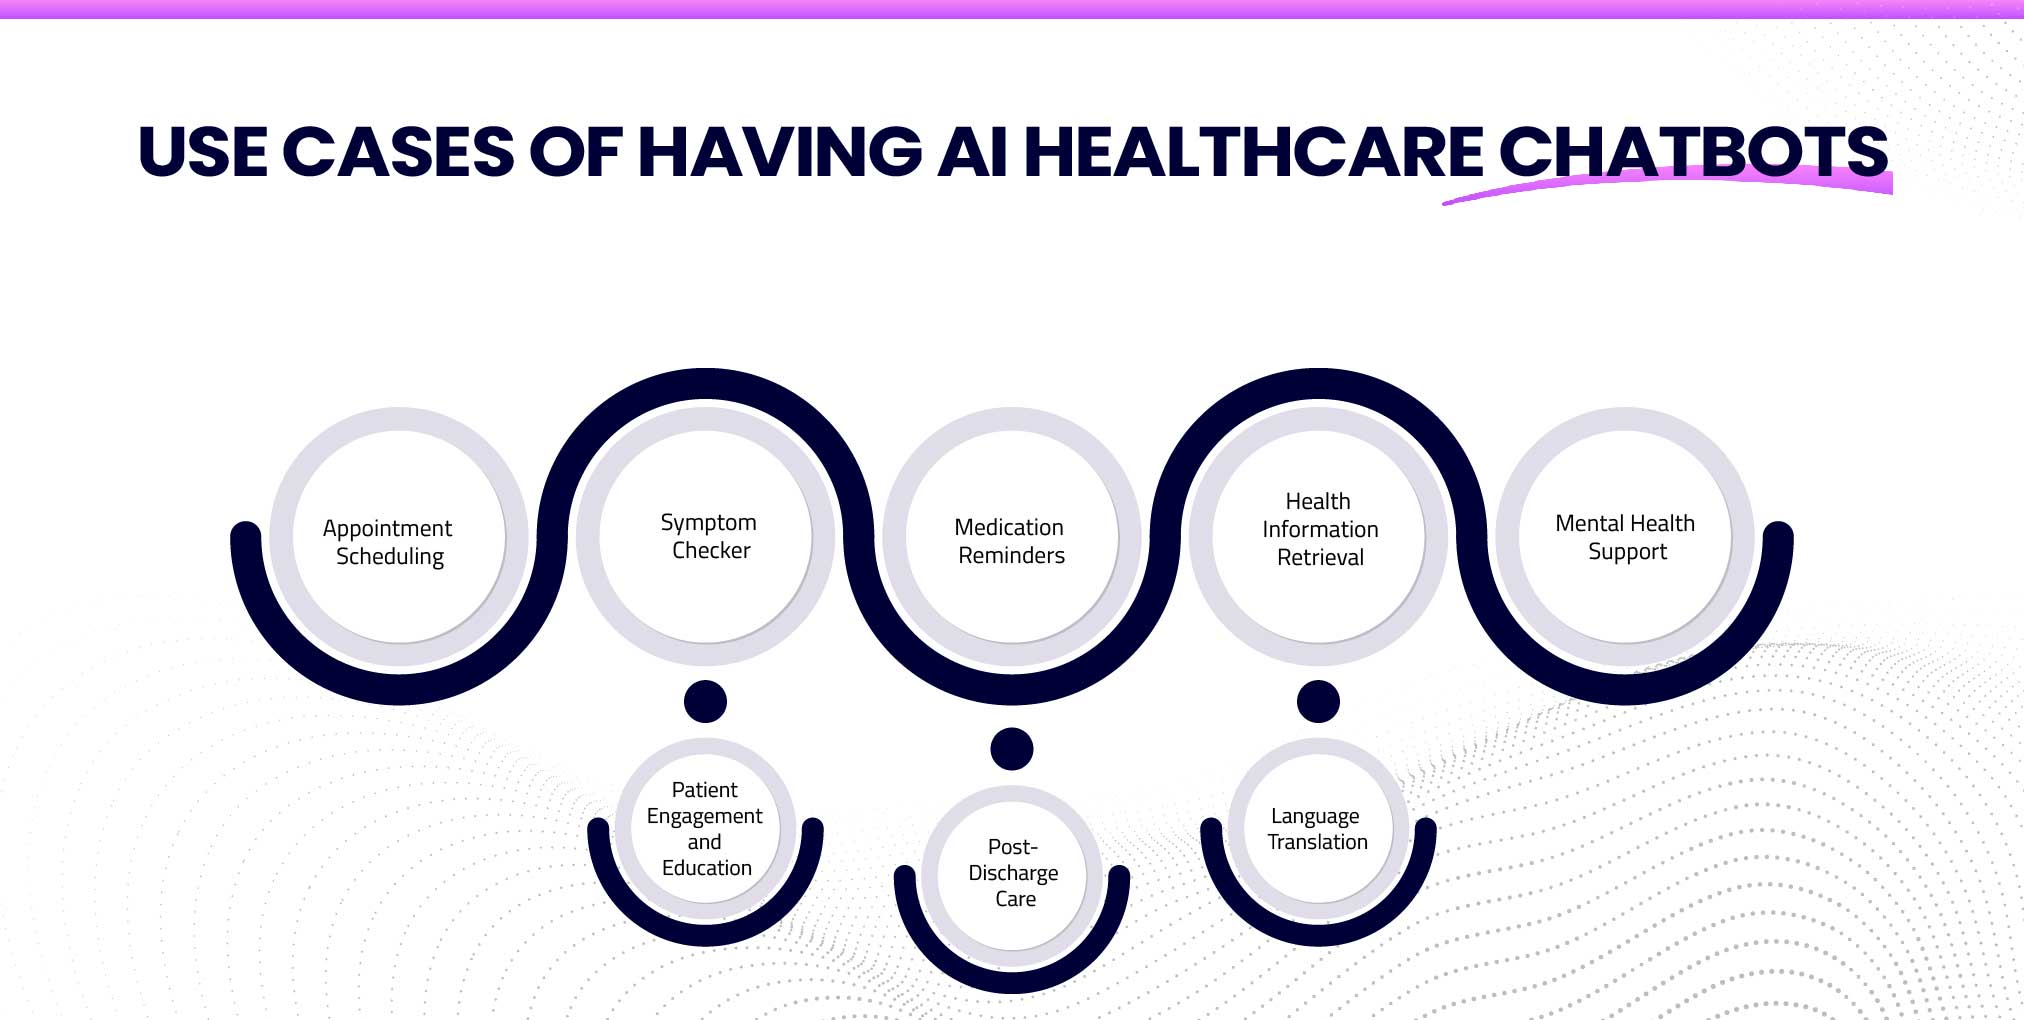 Use Cases of Having AI Healthcare Chatbots